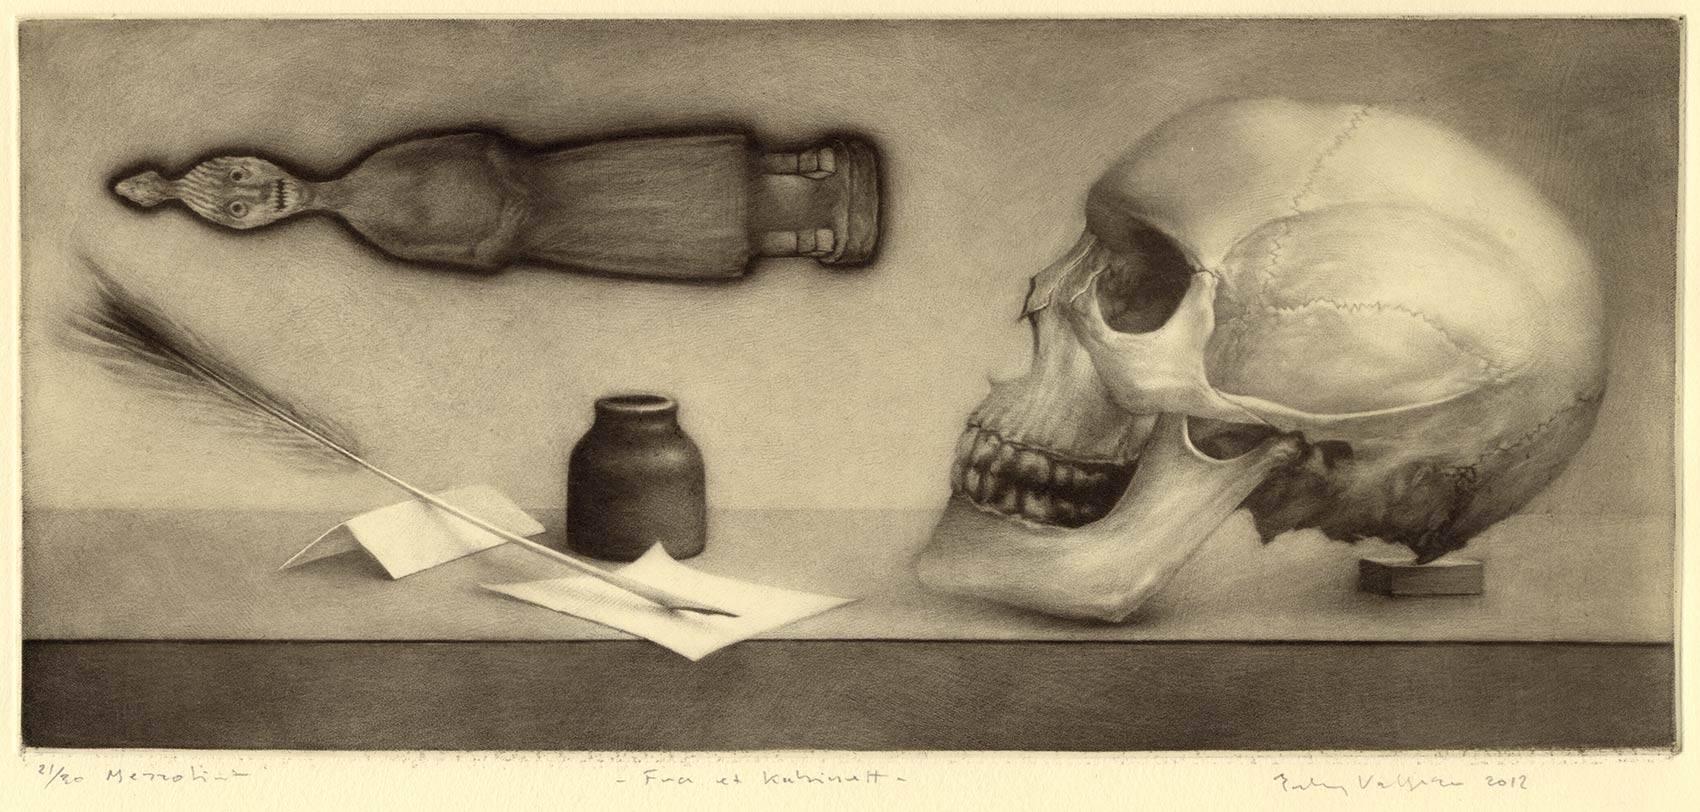 Erling Valtyrson Still-Life Print - From A Cabinet (Still life with skull, quil pen, inkwell, paper and icon)